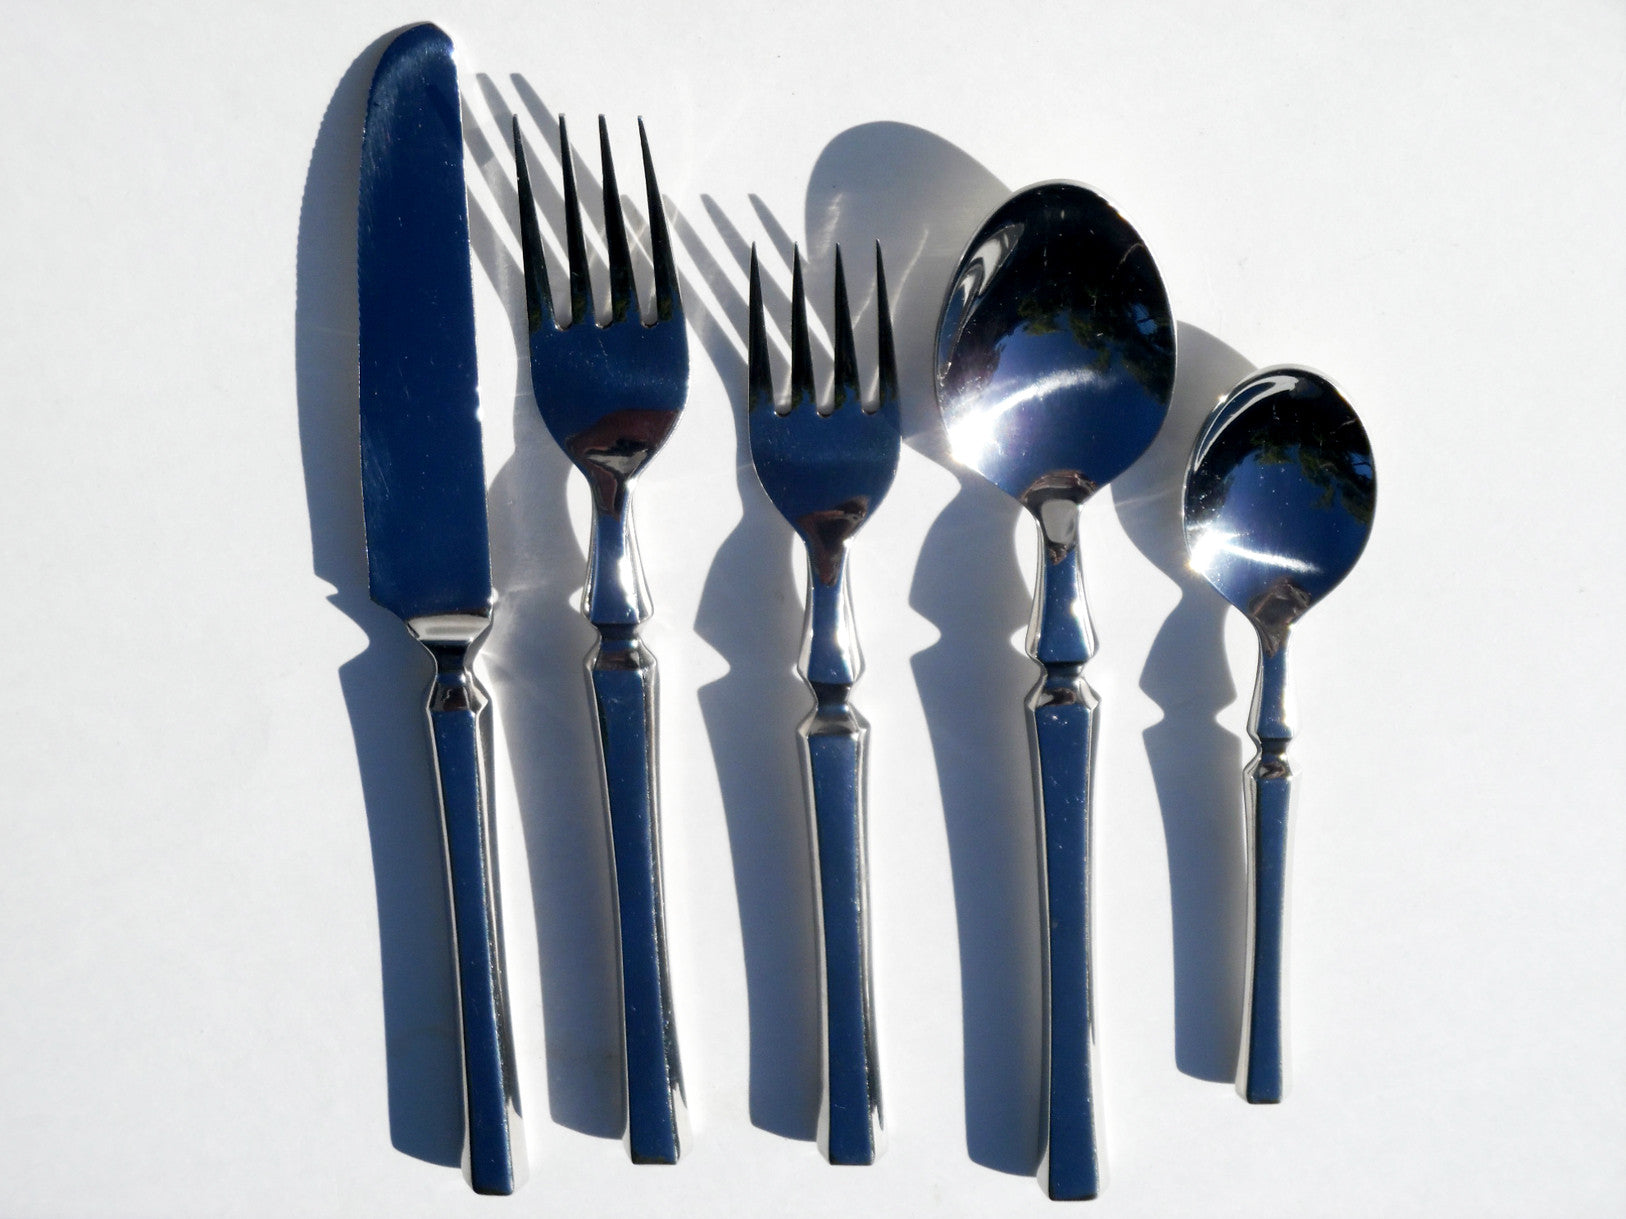 Stainless Steel Roman Design 5 Piece Place Setting